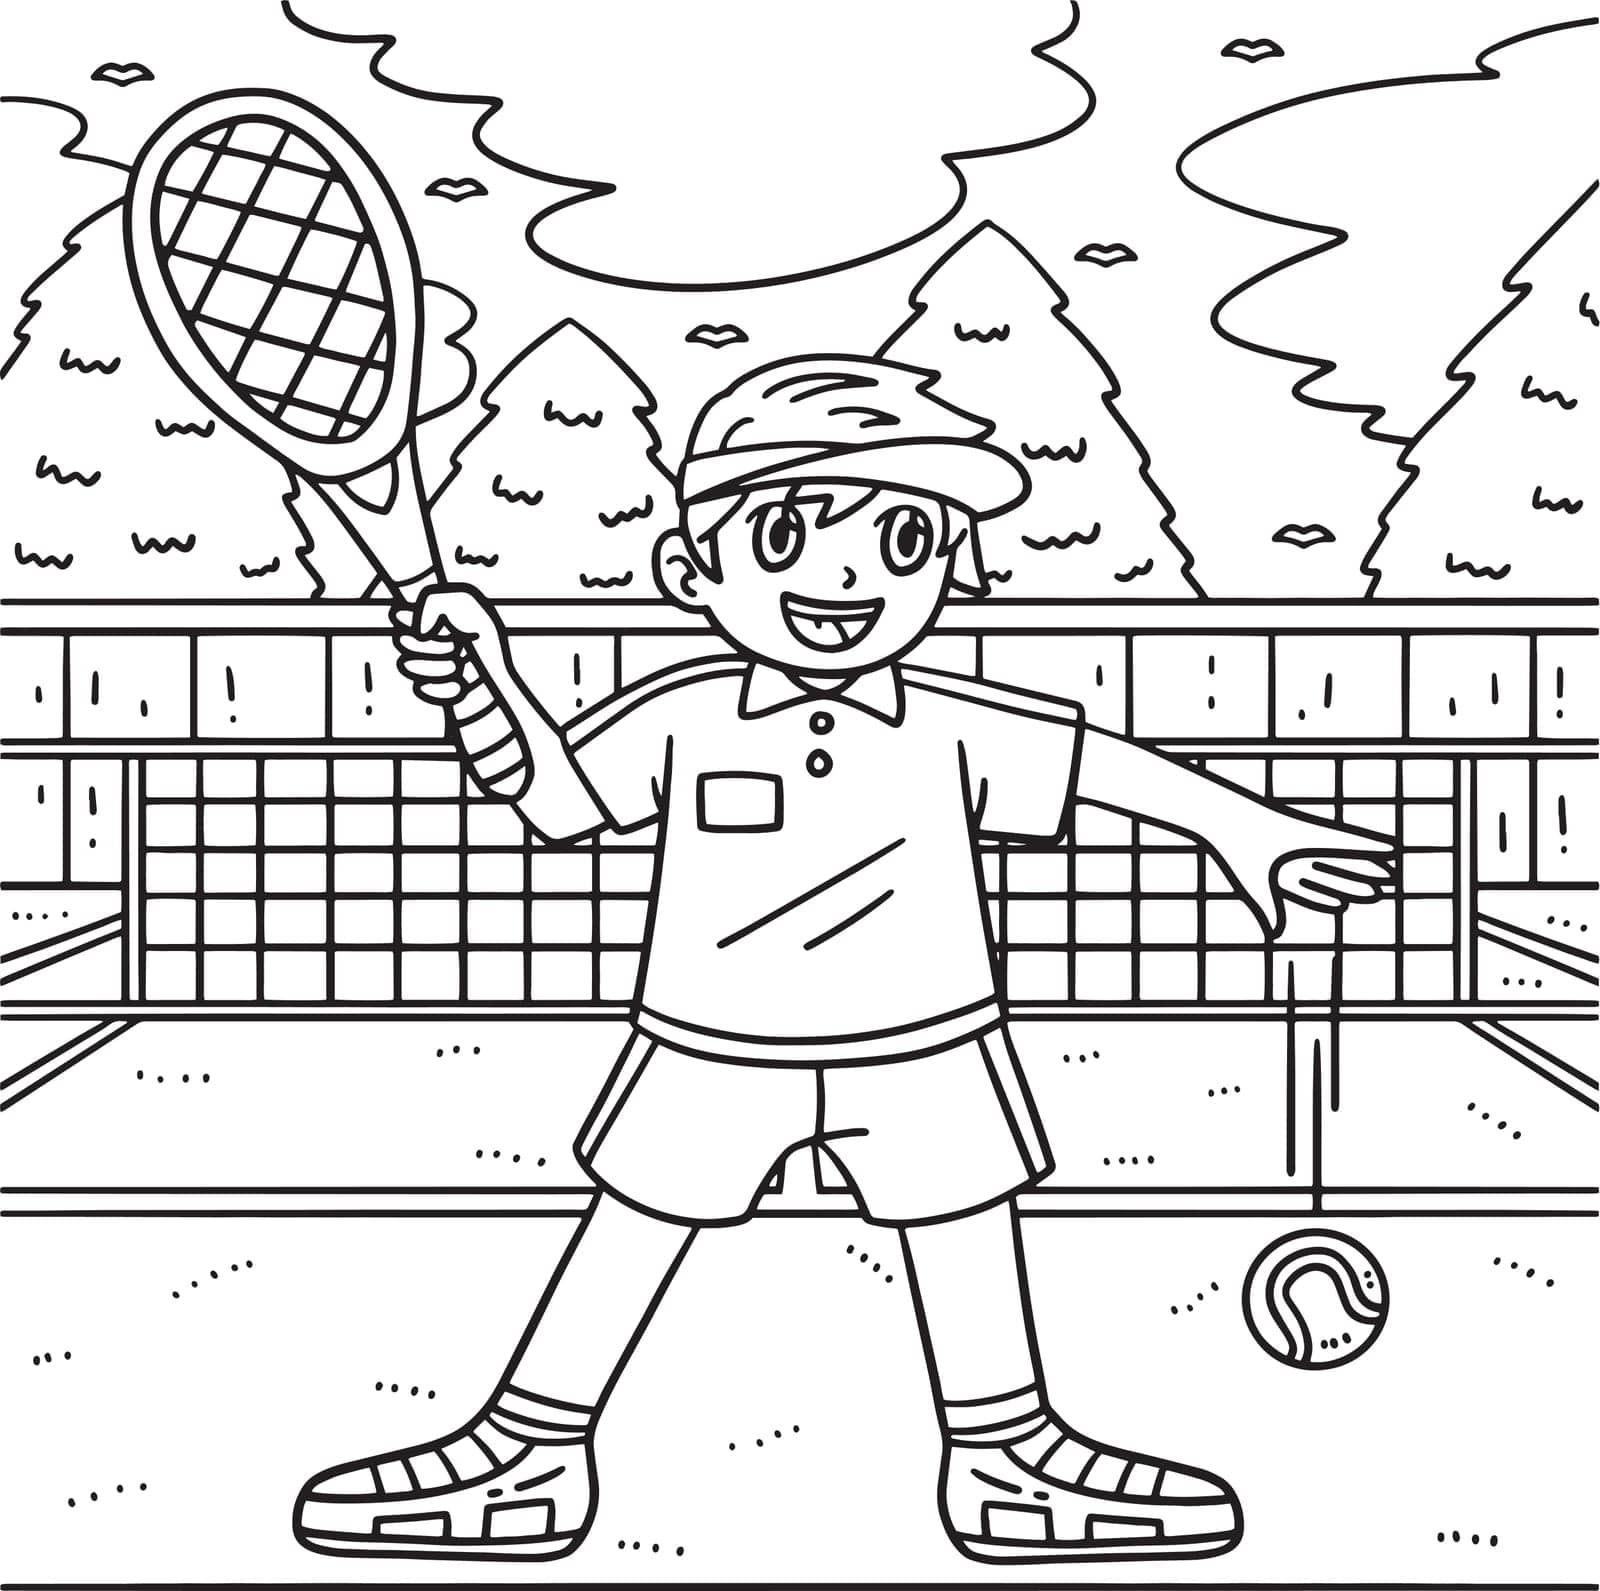 A cute and funny coloring page of a Tennis Player Dribbling Tennis Ball. Provides hours of coloring fun for children. To color, this page is very easy. Suitable for little kids and toddlers.